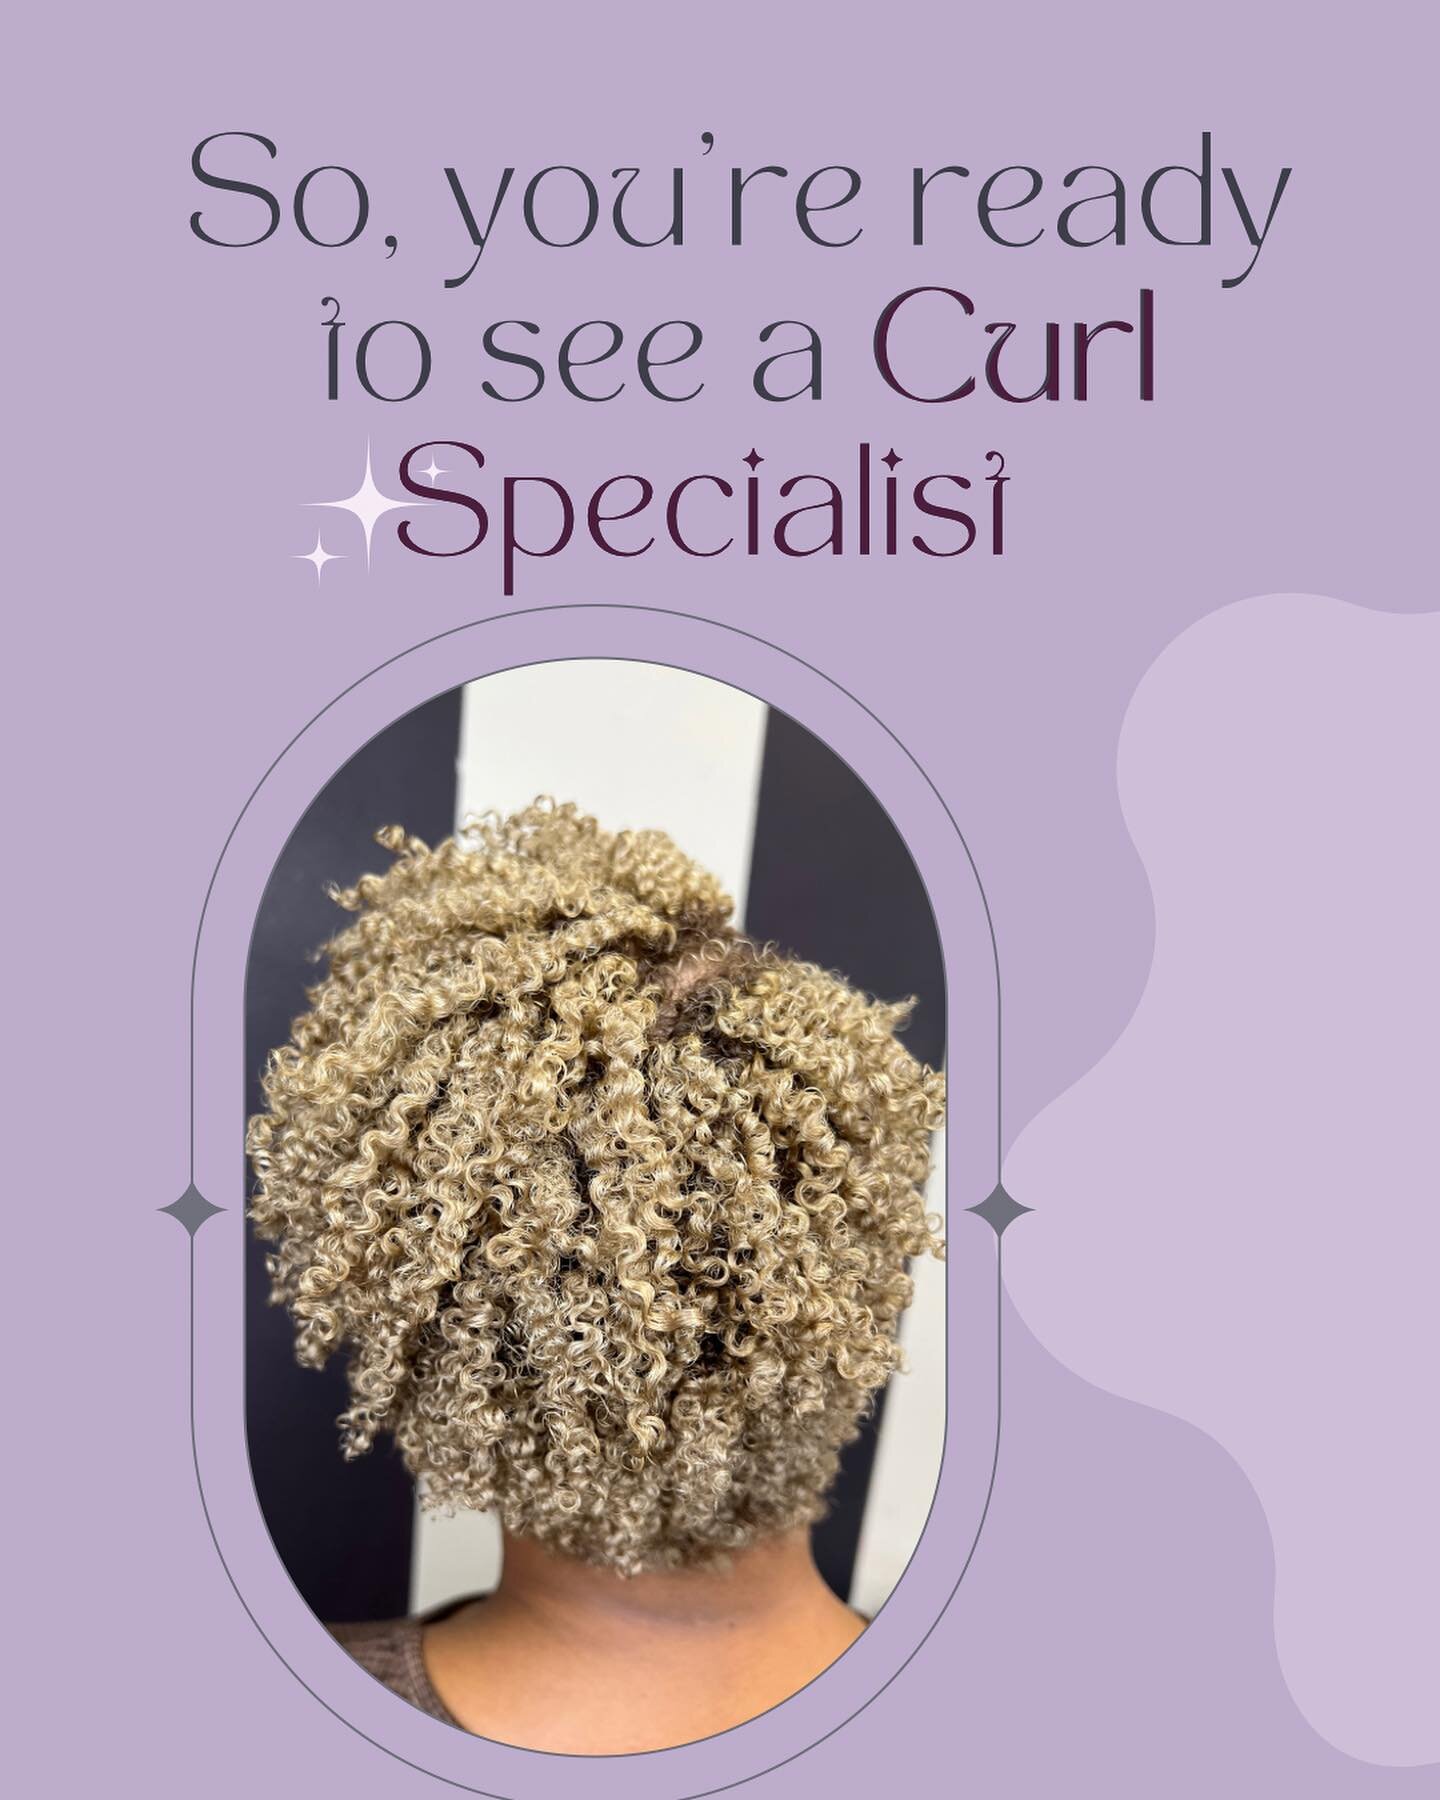 I&rsquo;m going to have to run this back again: Are you READY to see a Curl Specialist?.

WHAT YOU BRING TO THE SALON + YOUR STYLIST SKILLS = YOUR RESULTS

1) A Curl Specialist is more like a specialist doctor and unlike a general practitioner. 

🔑J